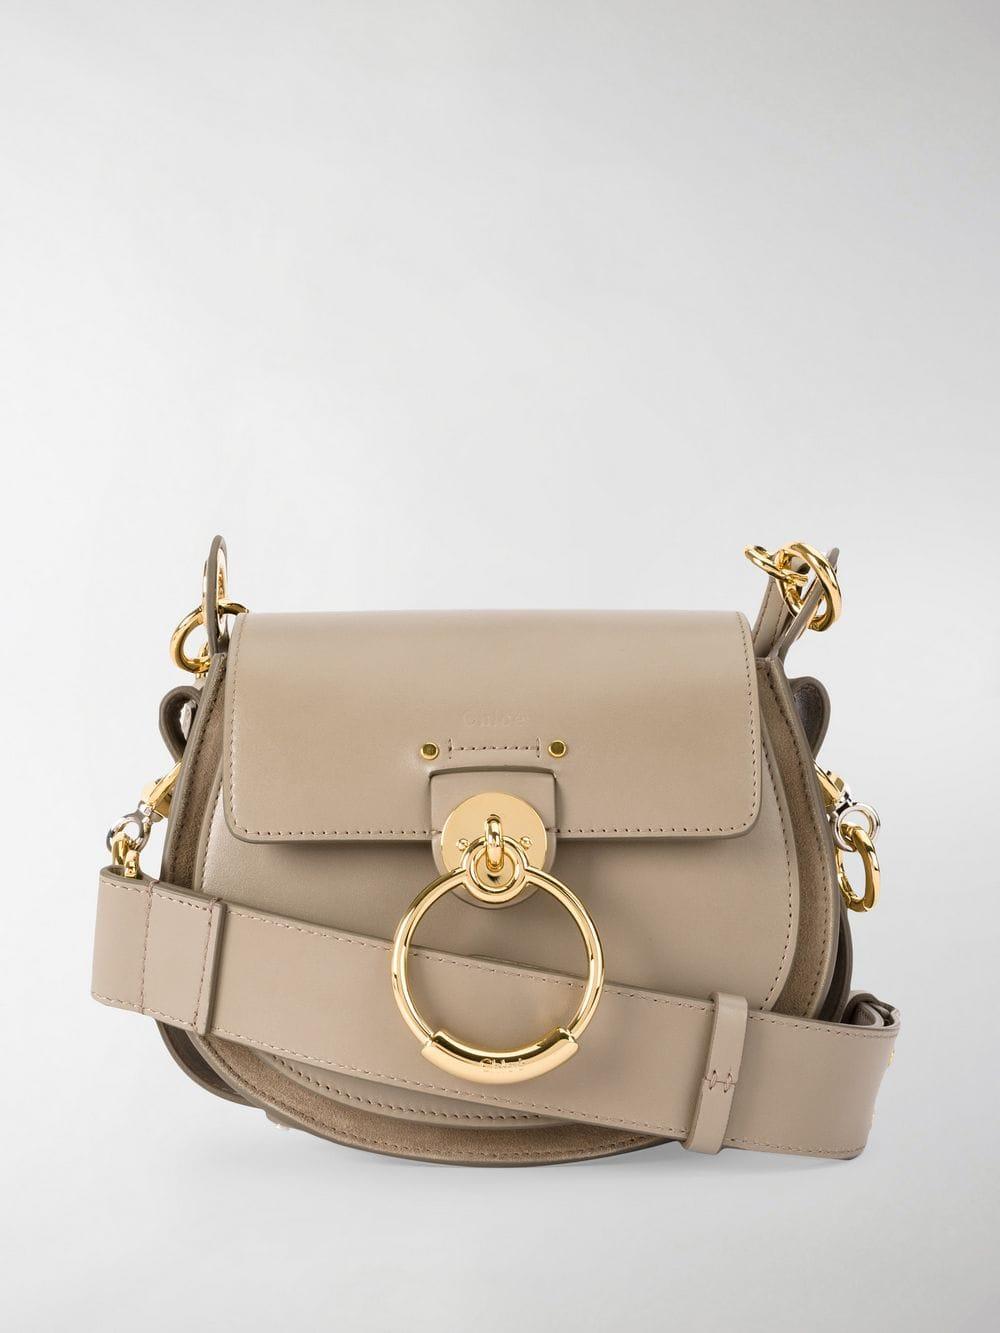 Chloé Grey Tess Leather Shoulder Bag in Gray - Lyst